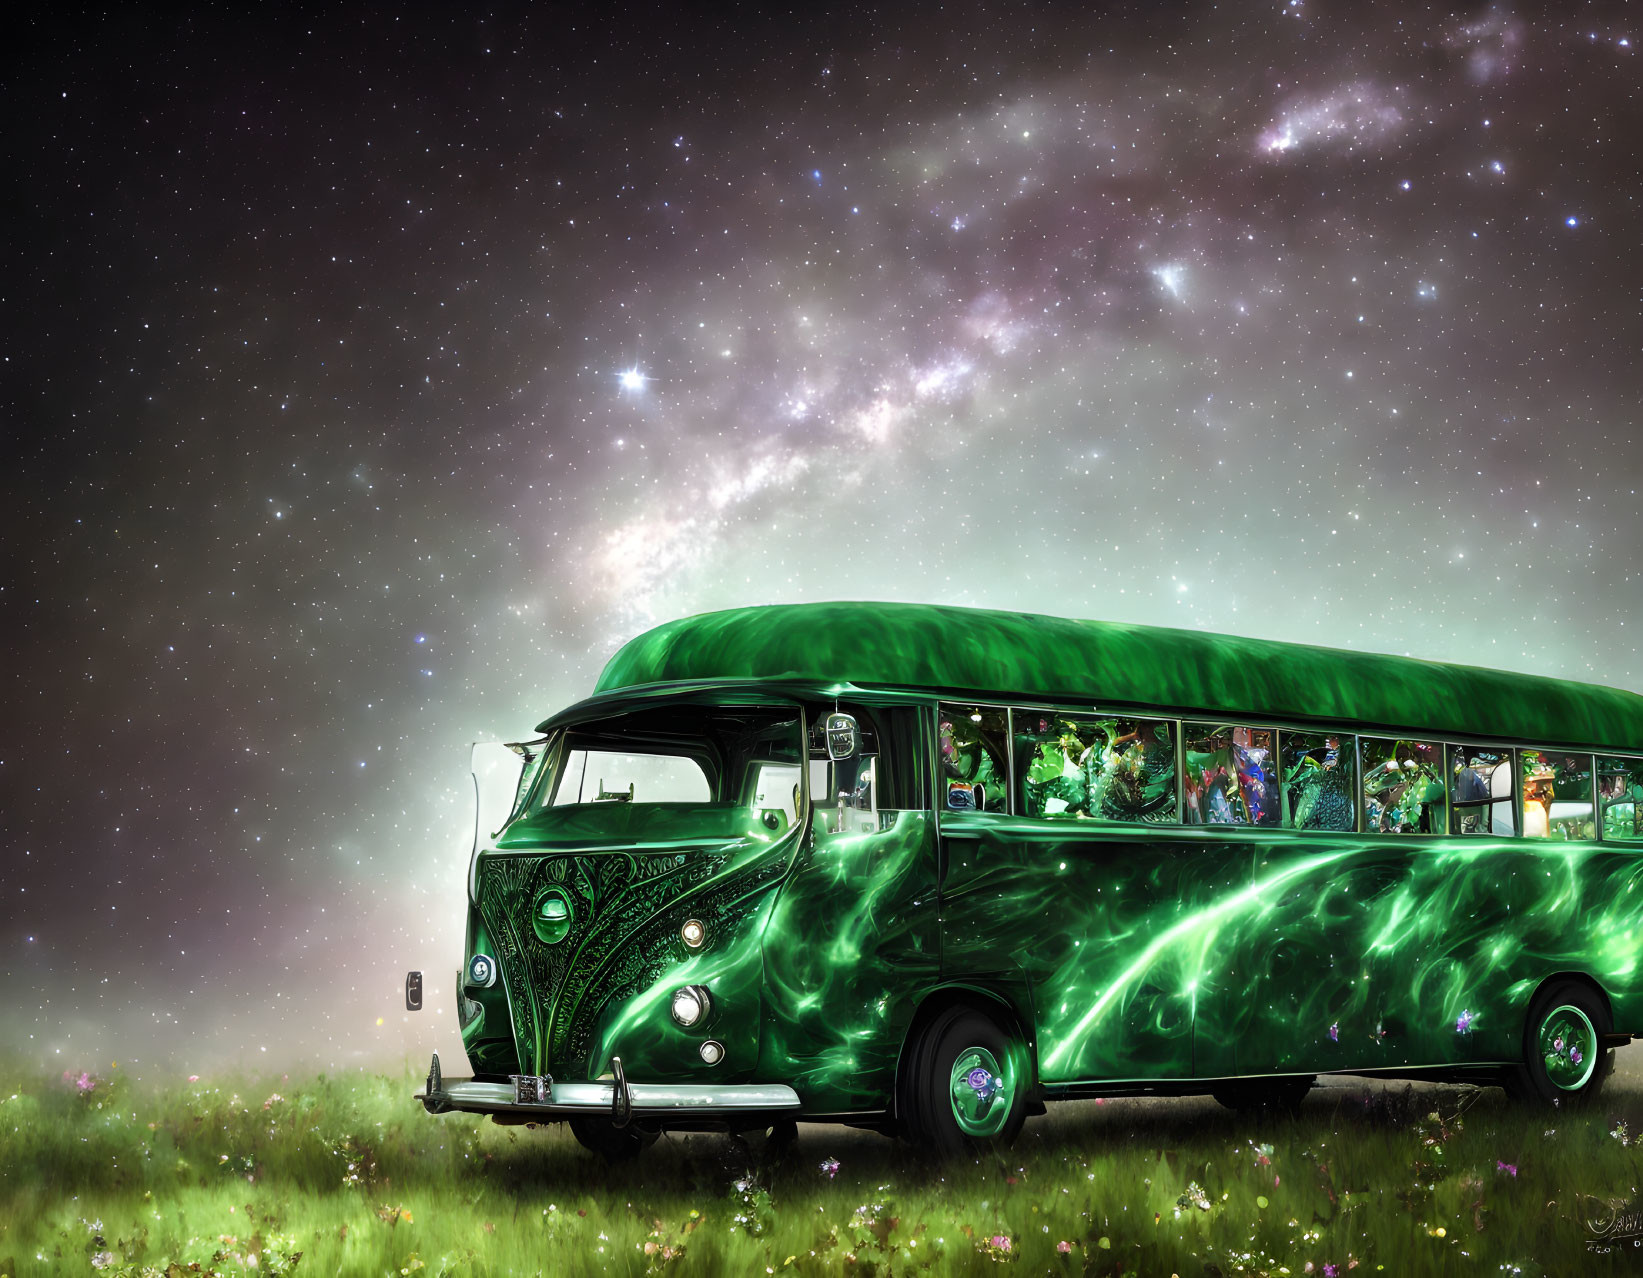 Magical green bus with passengers in meadow under starry night sky